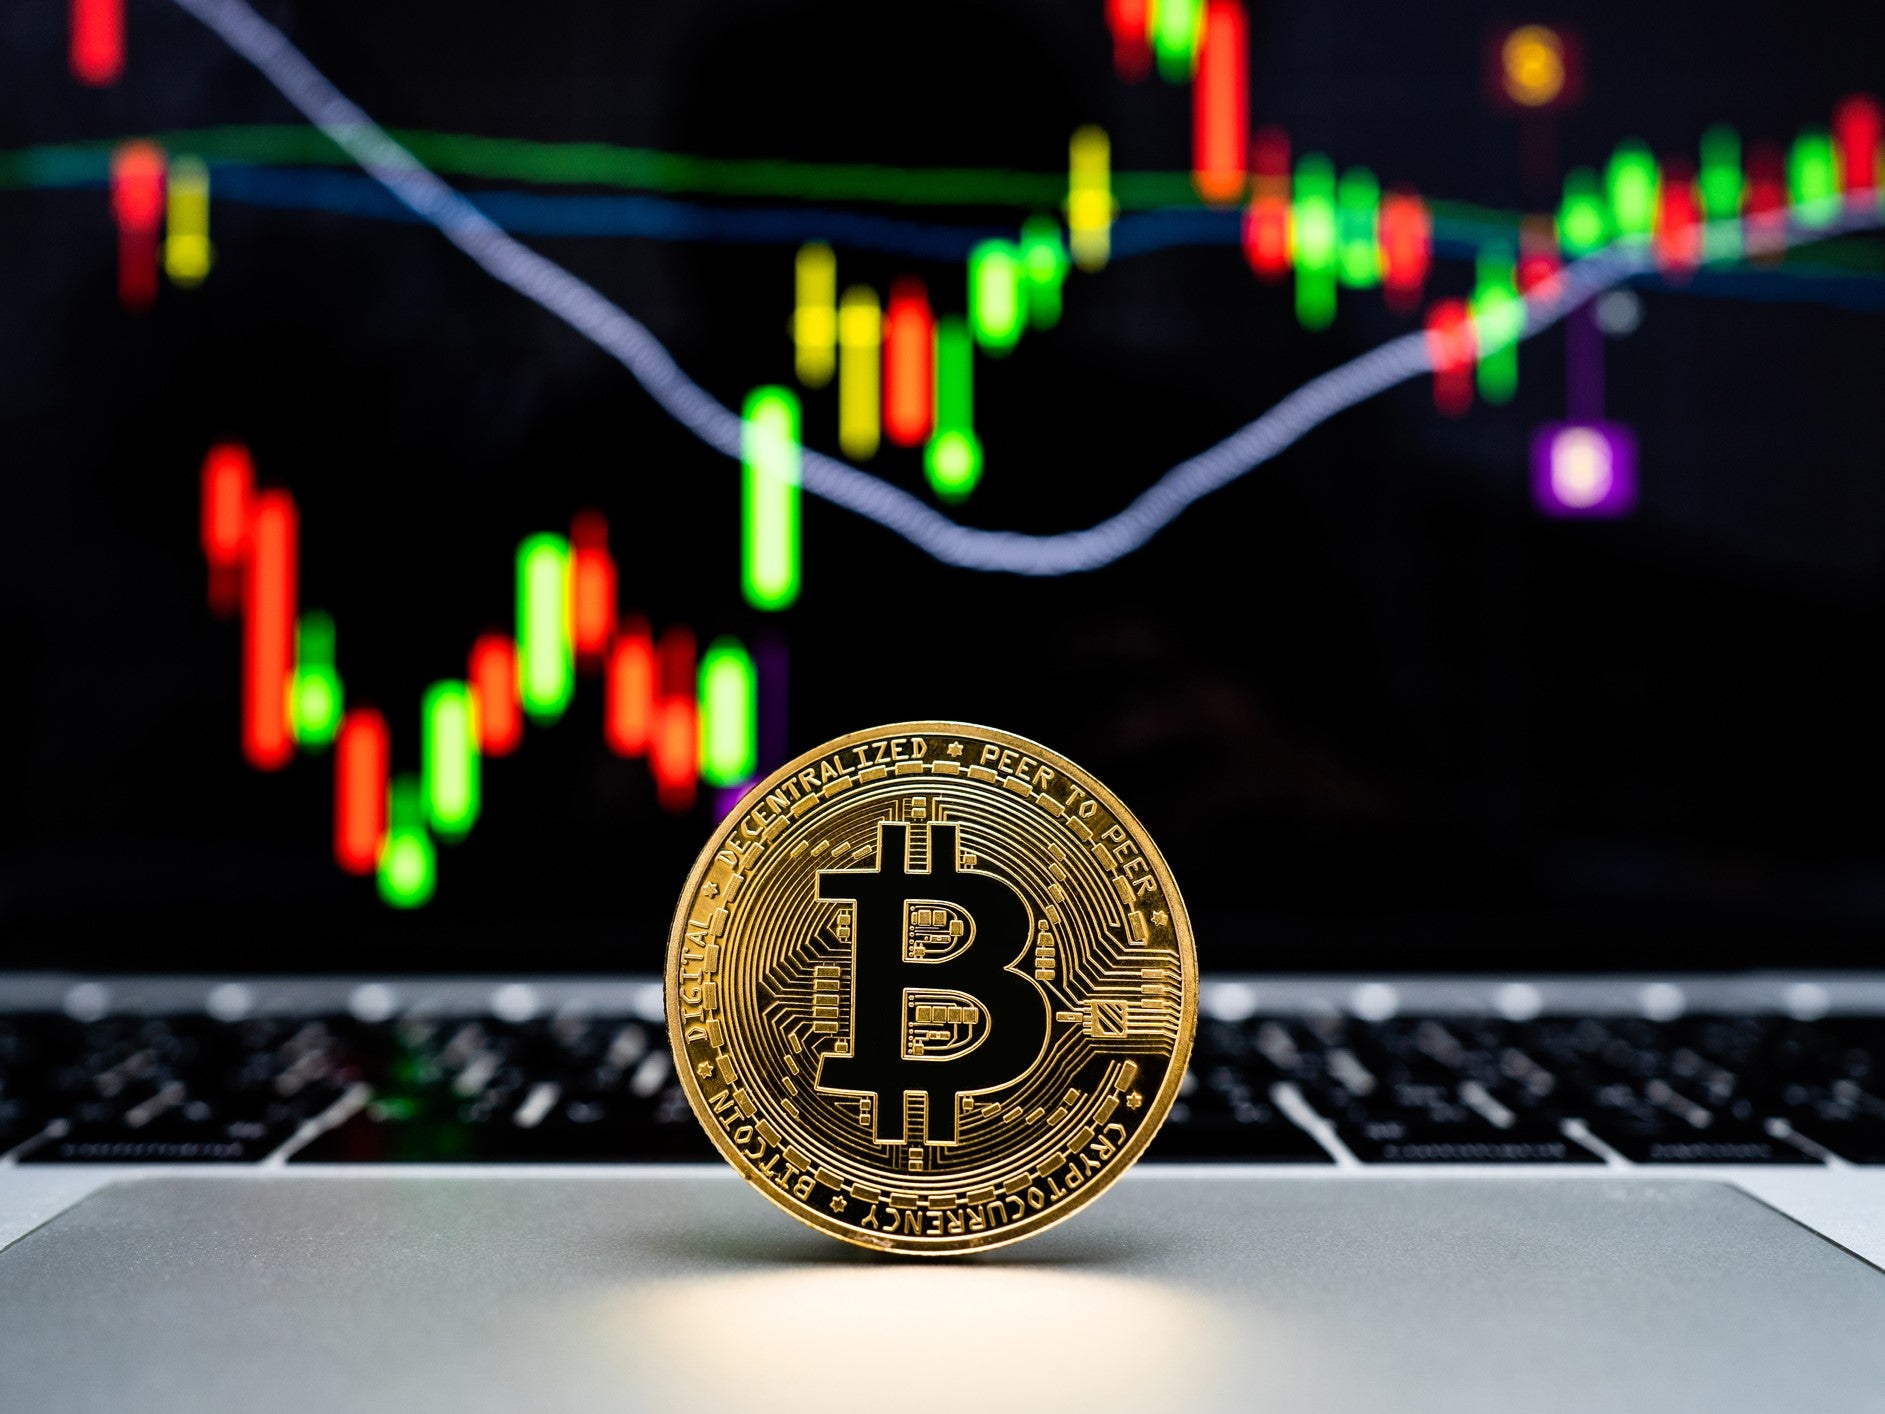 The price of bitcoin has staged a remarkable recovery in August 2021